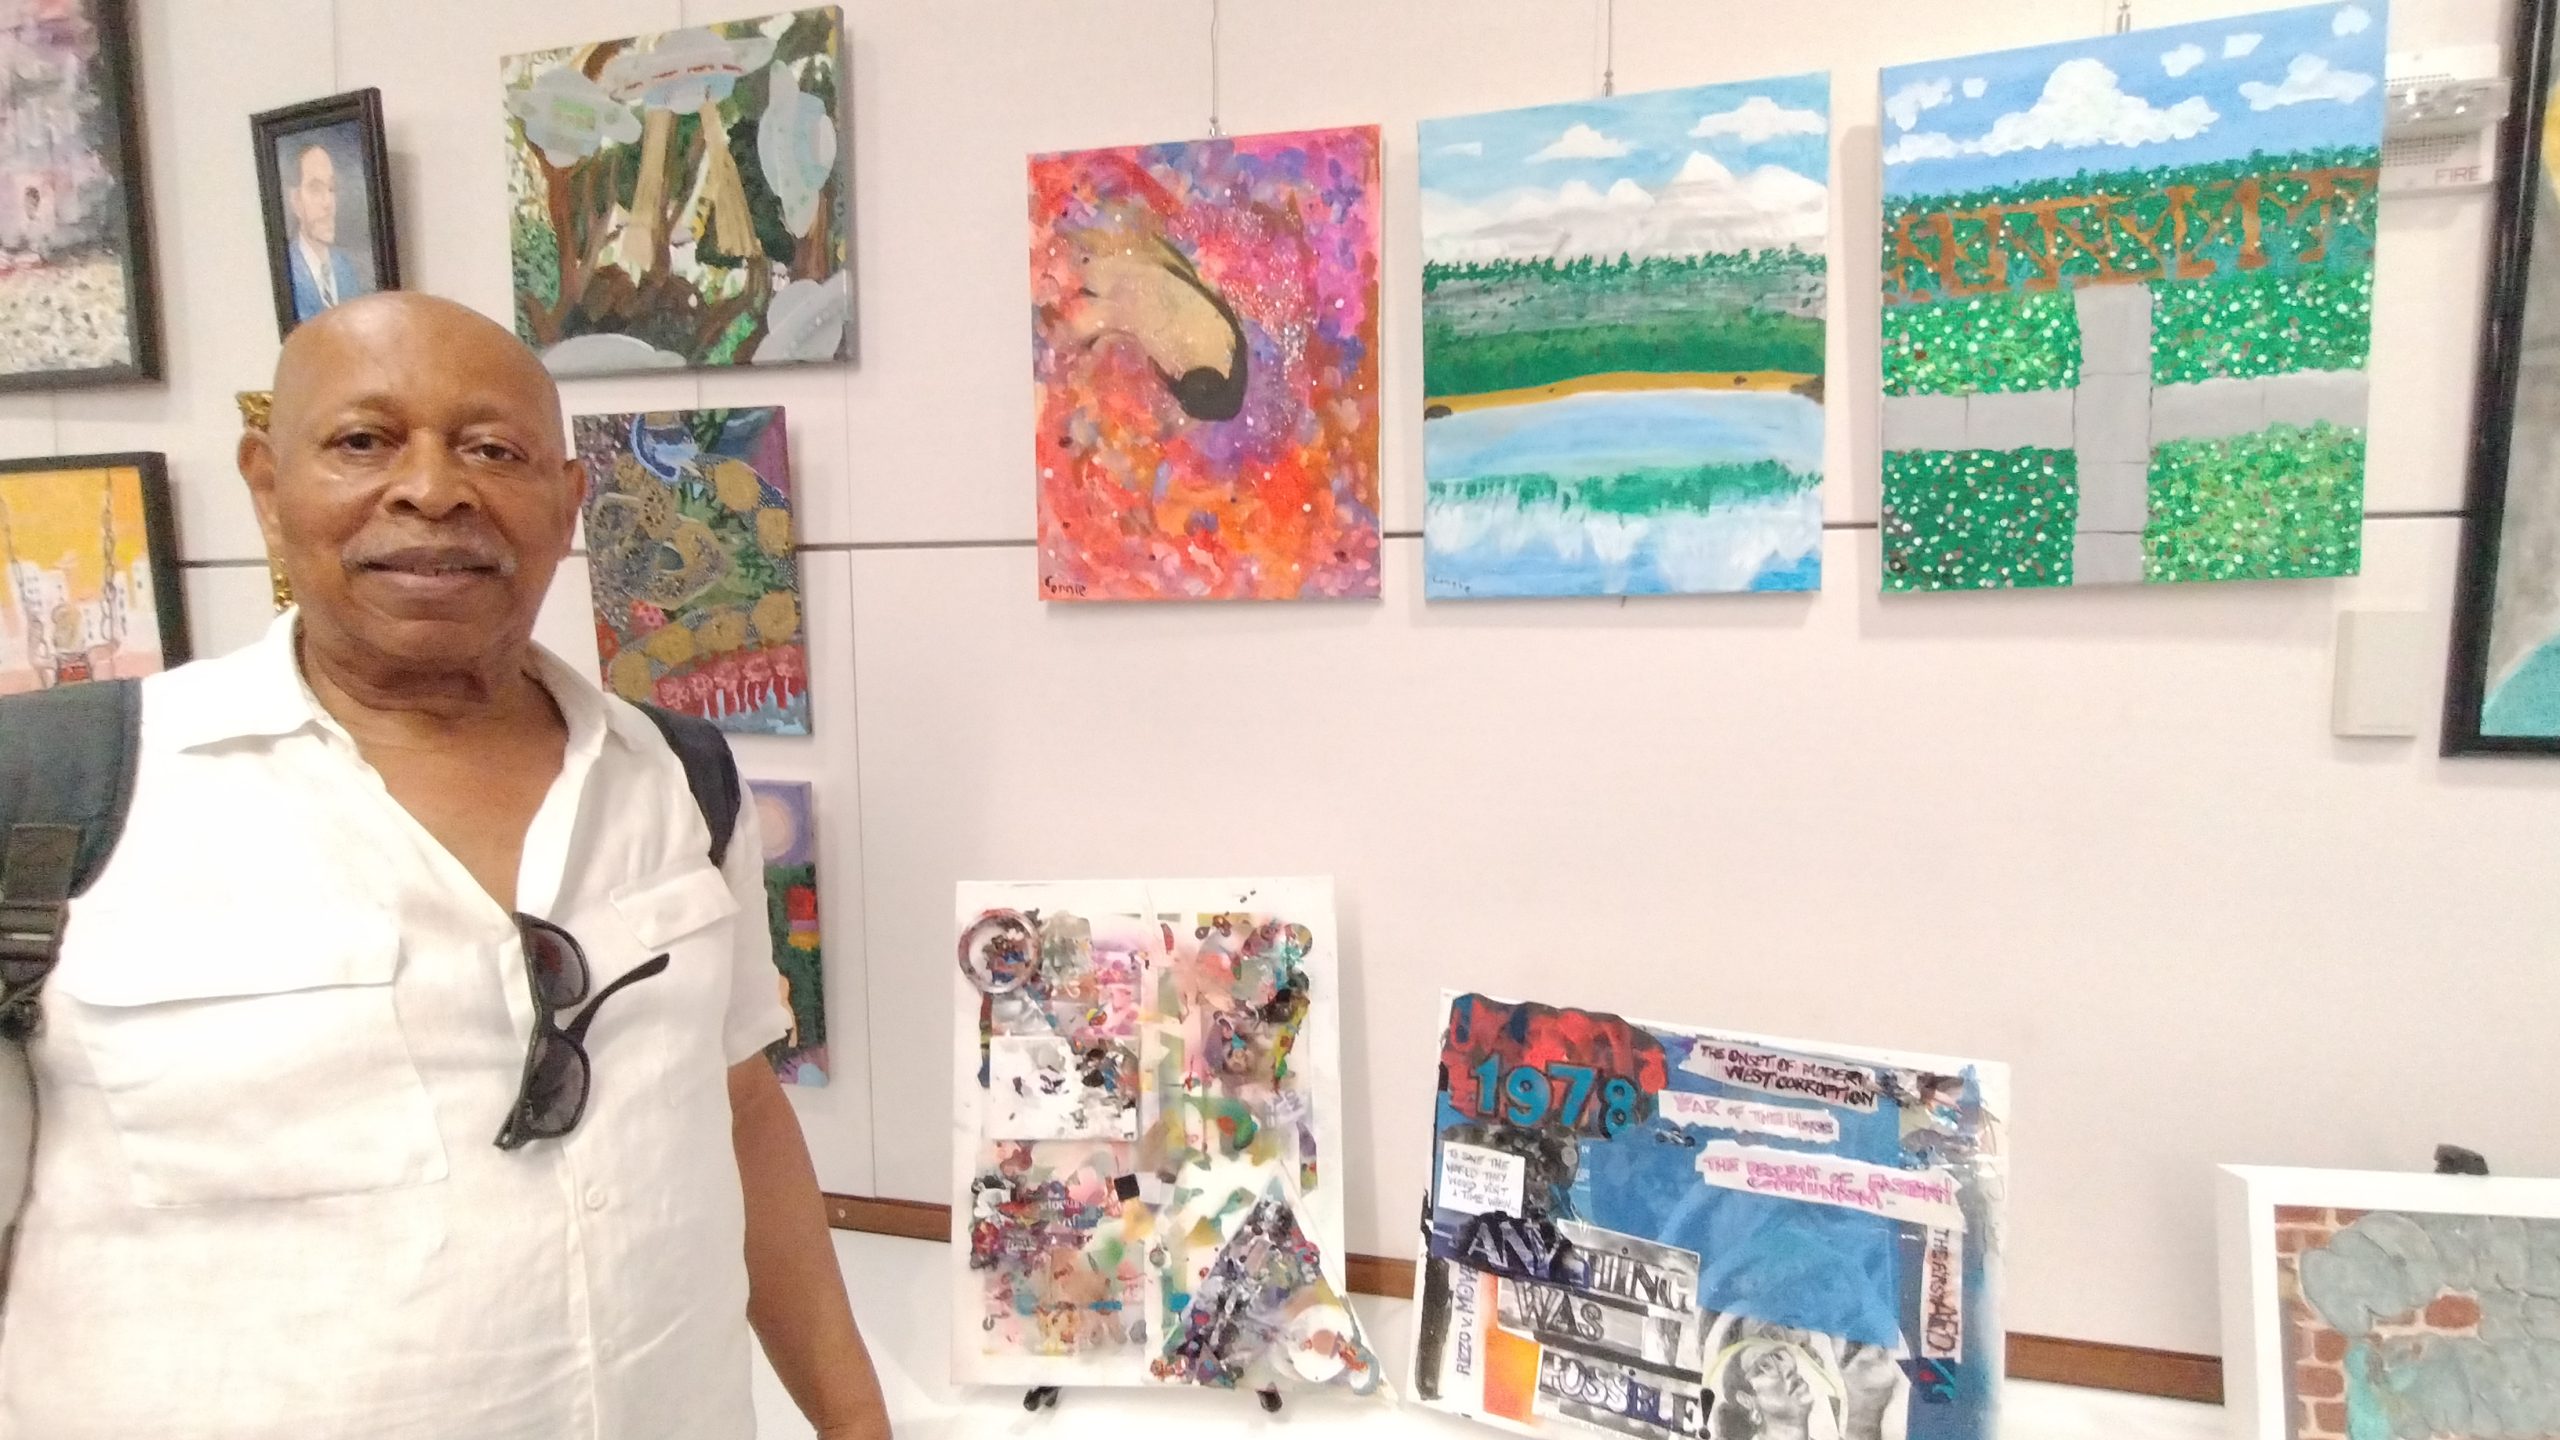 Union members display talents at 32BJ art show